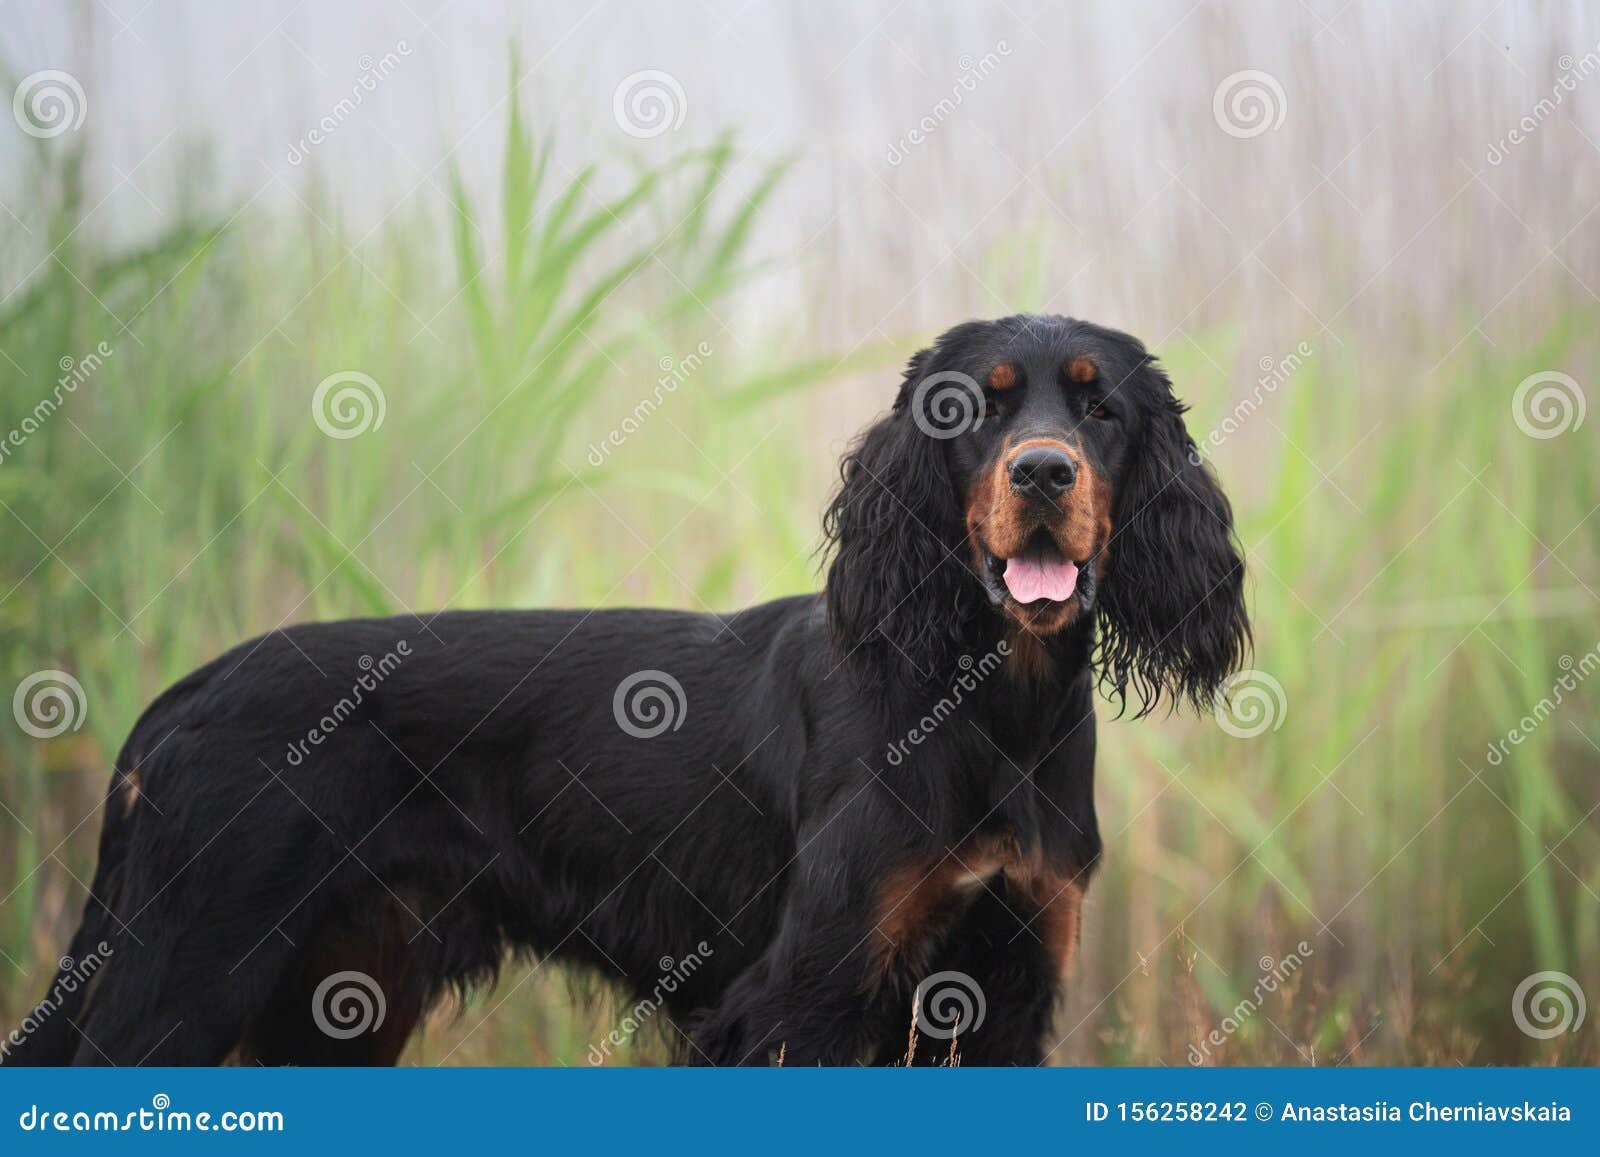 Gorgeous Black And Tan Setter Gordon Dog Standing In The Grass In Summer Stock Photo Image Of Canine Sweet 156258242